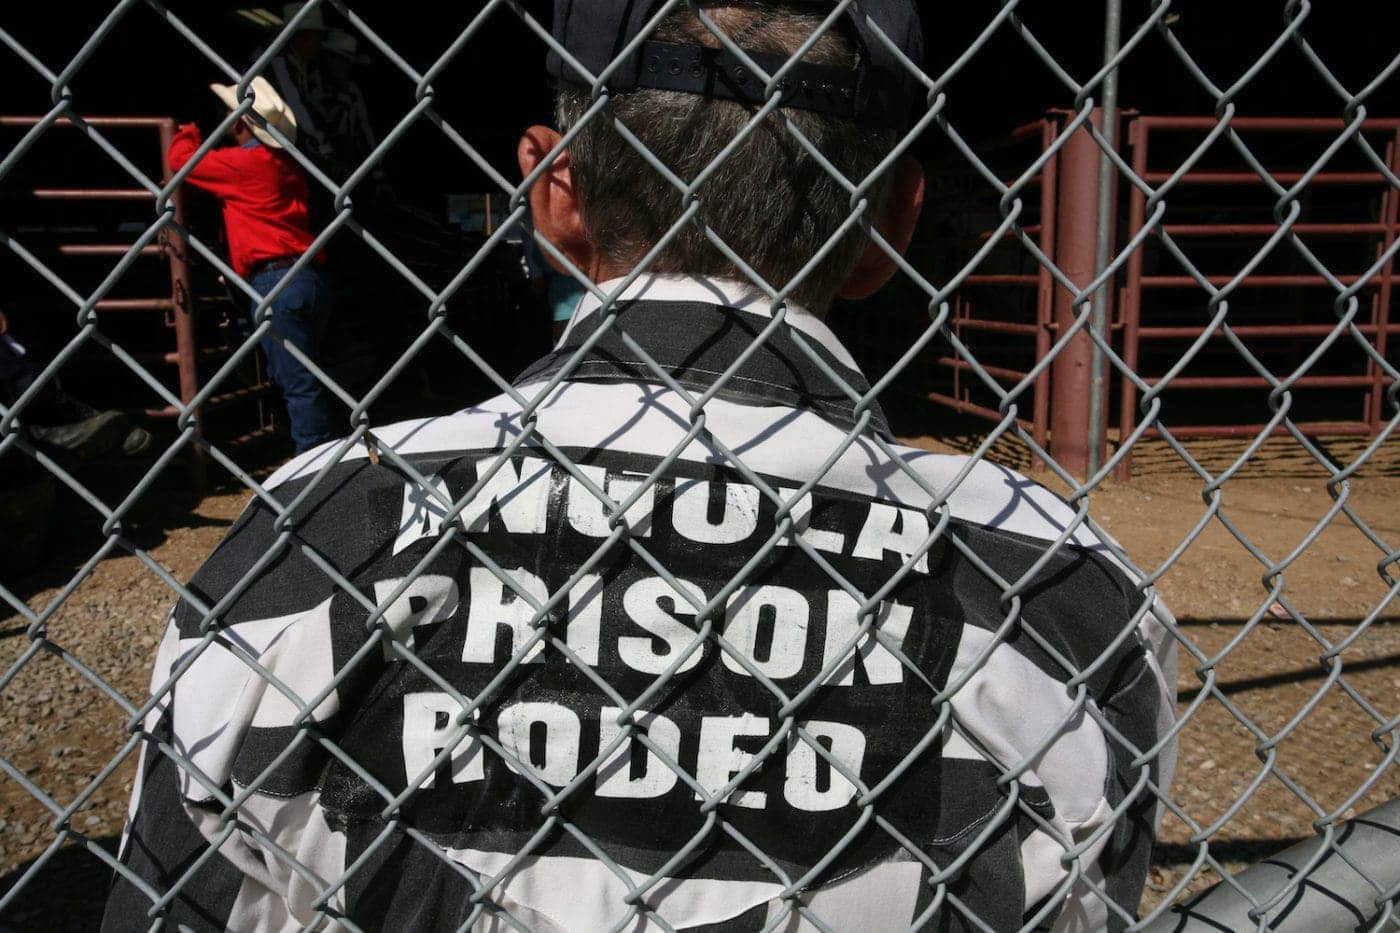 Angola-Prison-Rodeo-prisoner-participant-1400x933, The Angola gulag, Behind Enemy Lines 